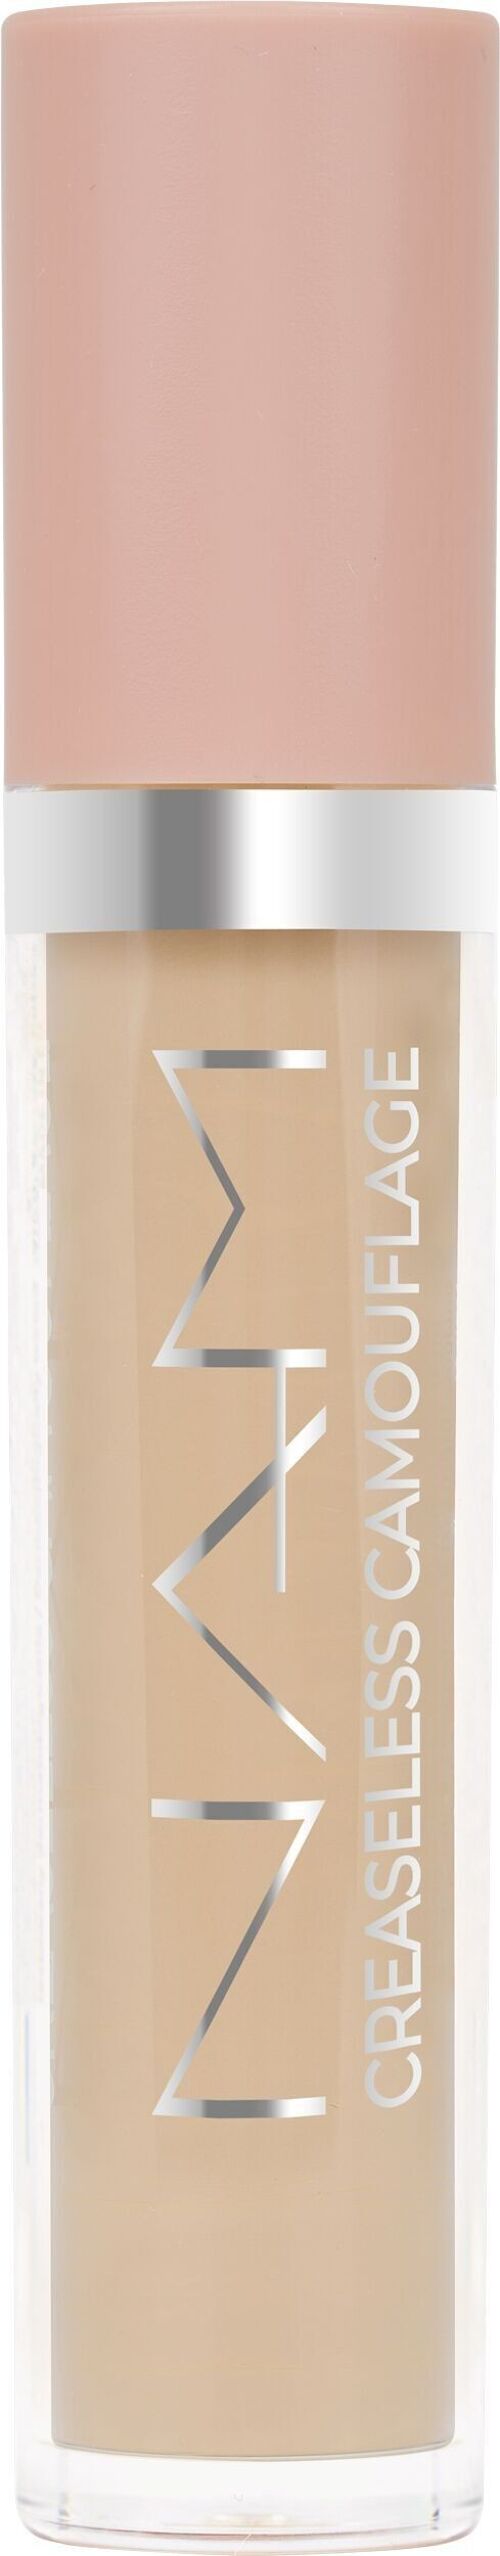 NAM Corrector Creaseless Camouflage 08N - Sunkissed